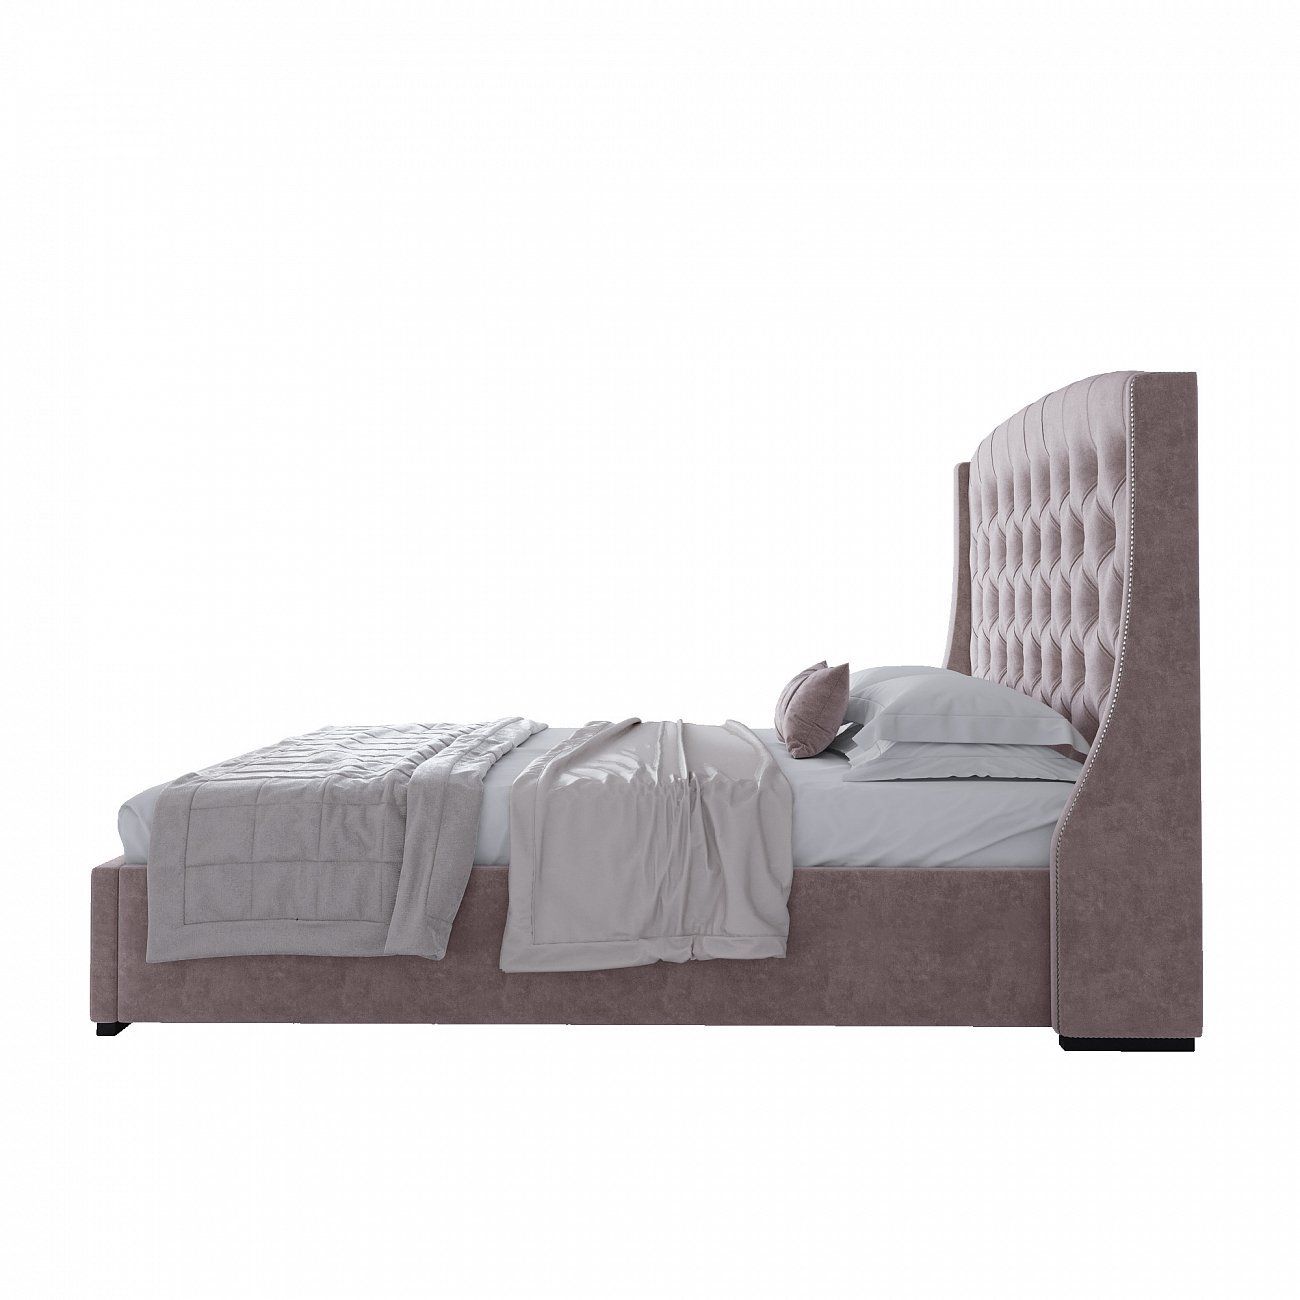 Double bed with upholstered headboard 160x200 cm dusty rose Hugo